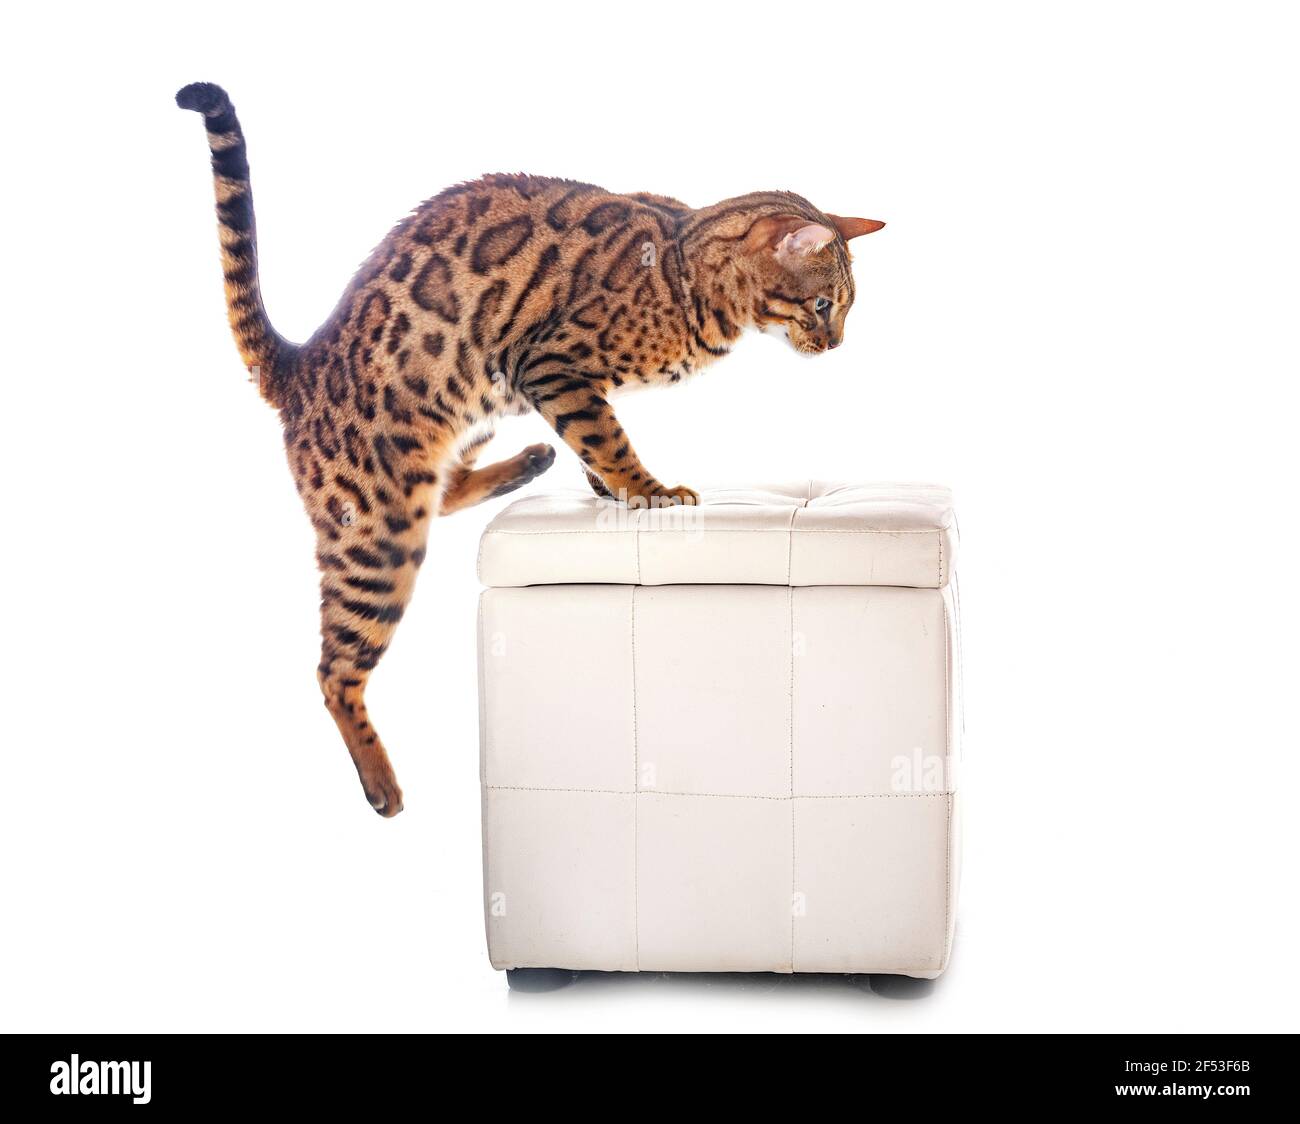 bengal cat in front of white background Stock Photo